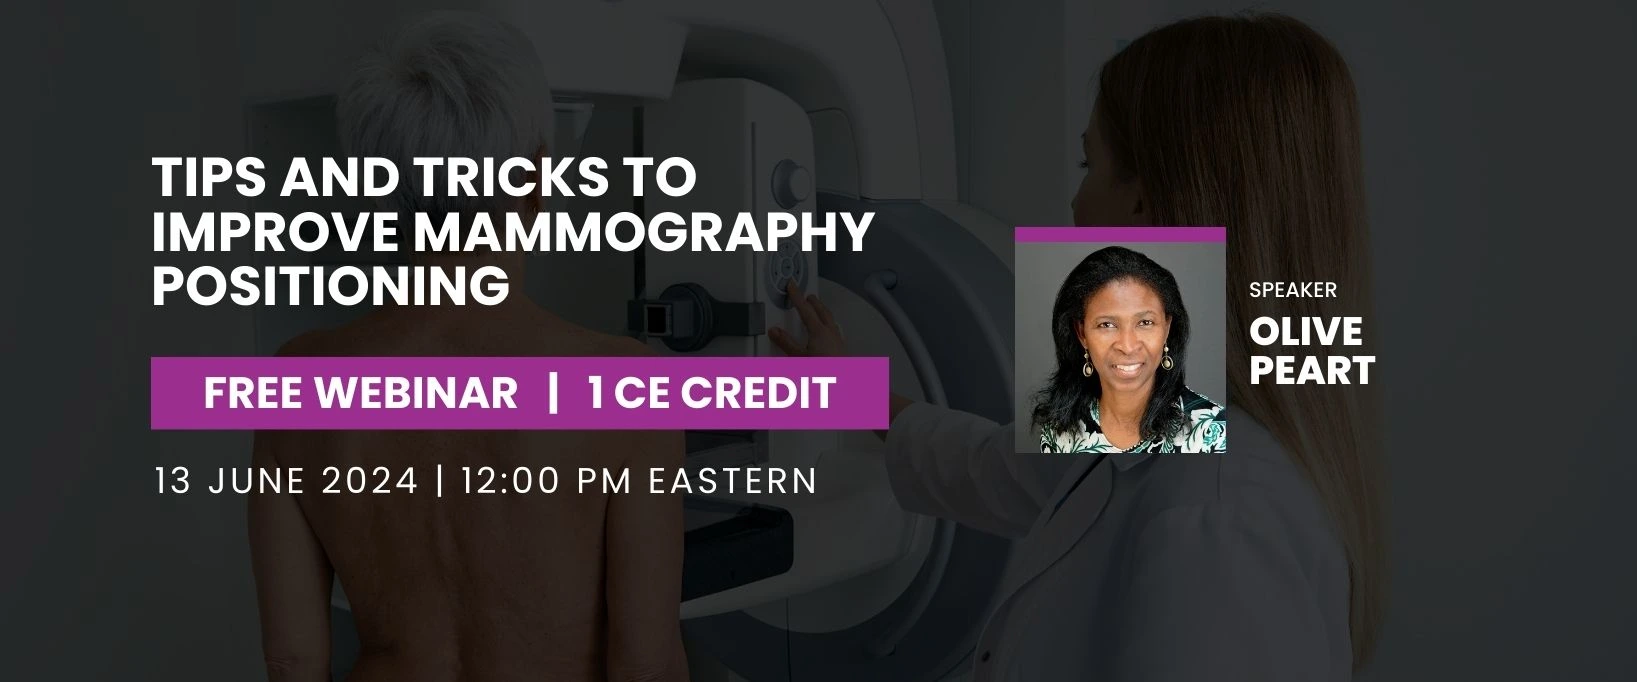 Tips and Tricks to Improve Mammography Positioning Webinar